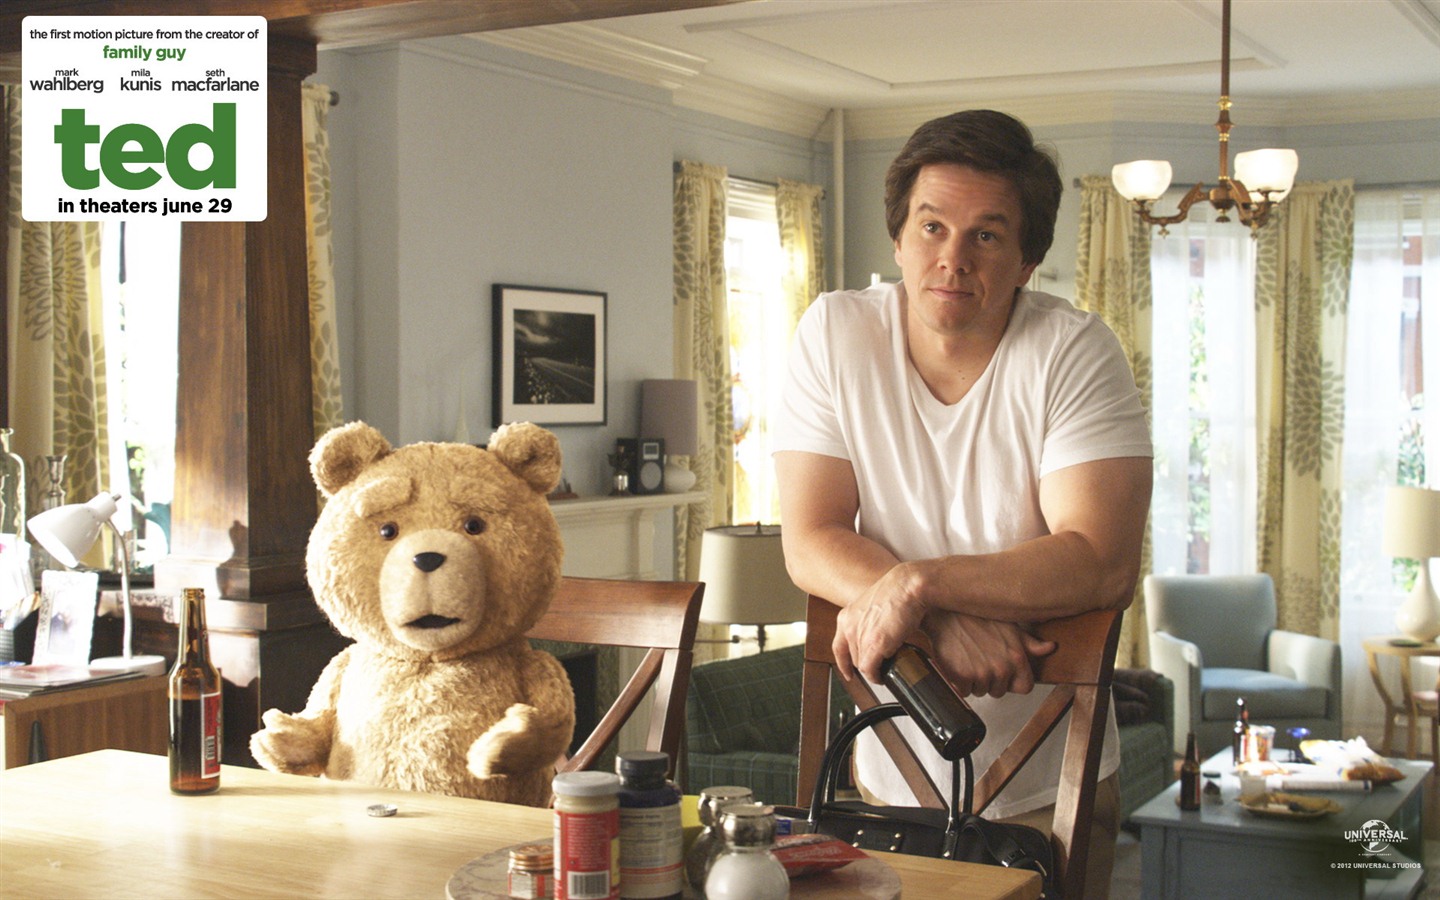 Ted 2012 HD movie wallpapers #3 - 1440x900